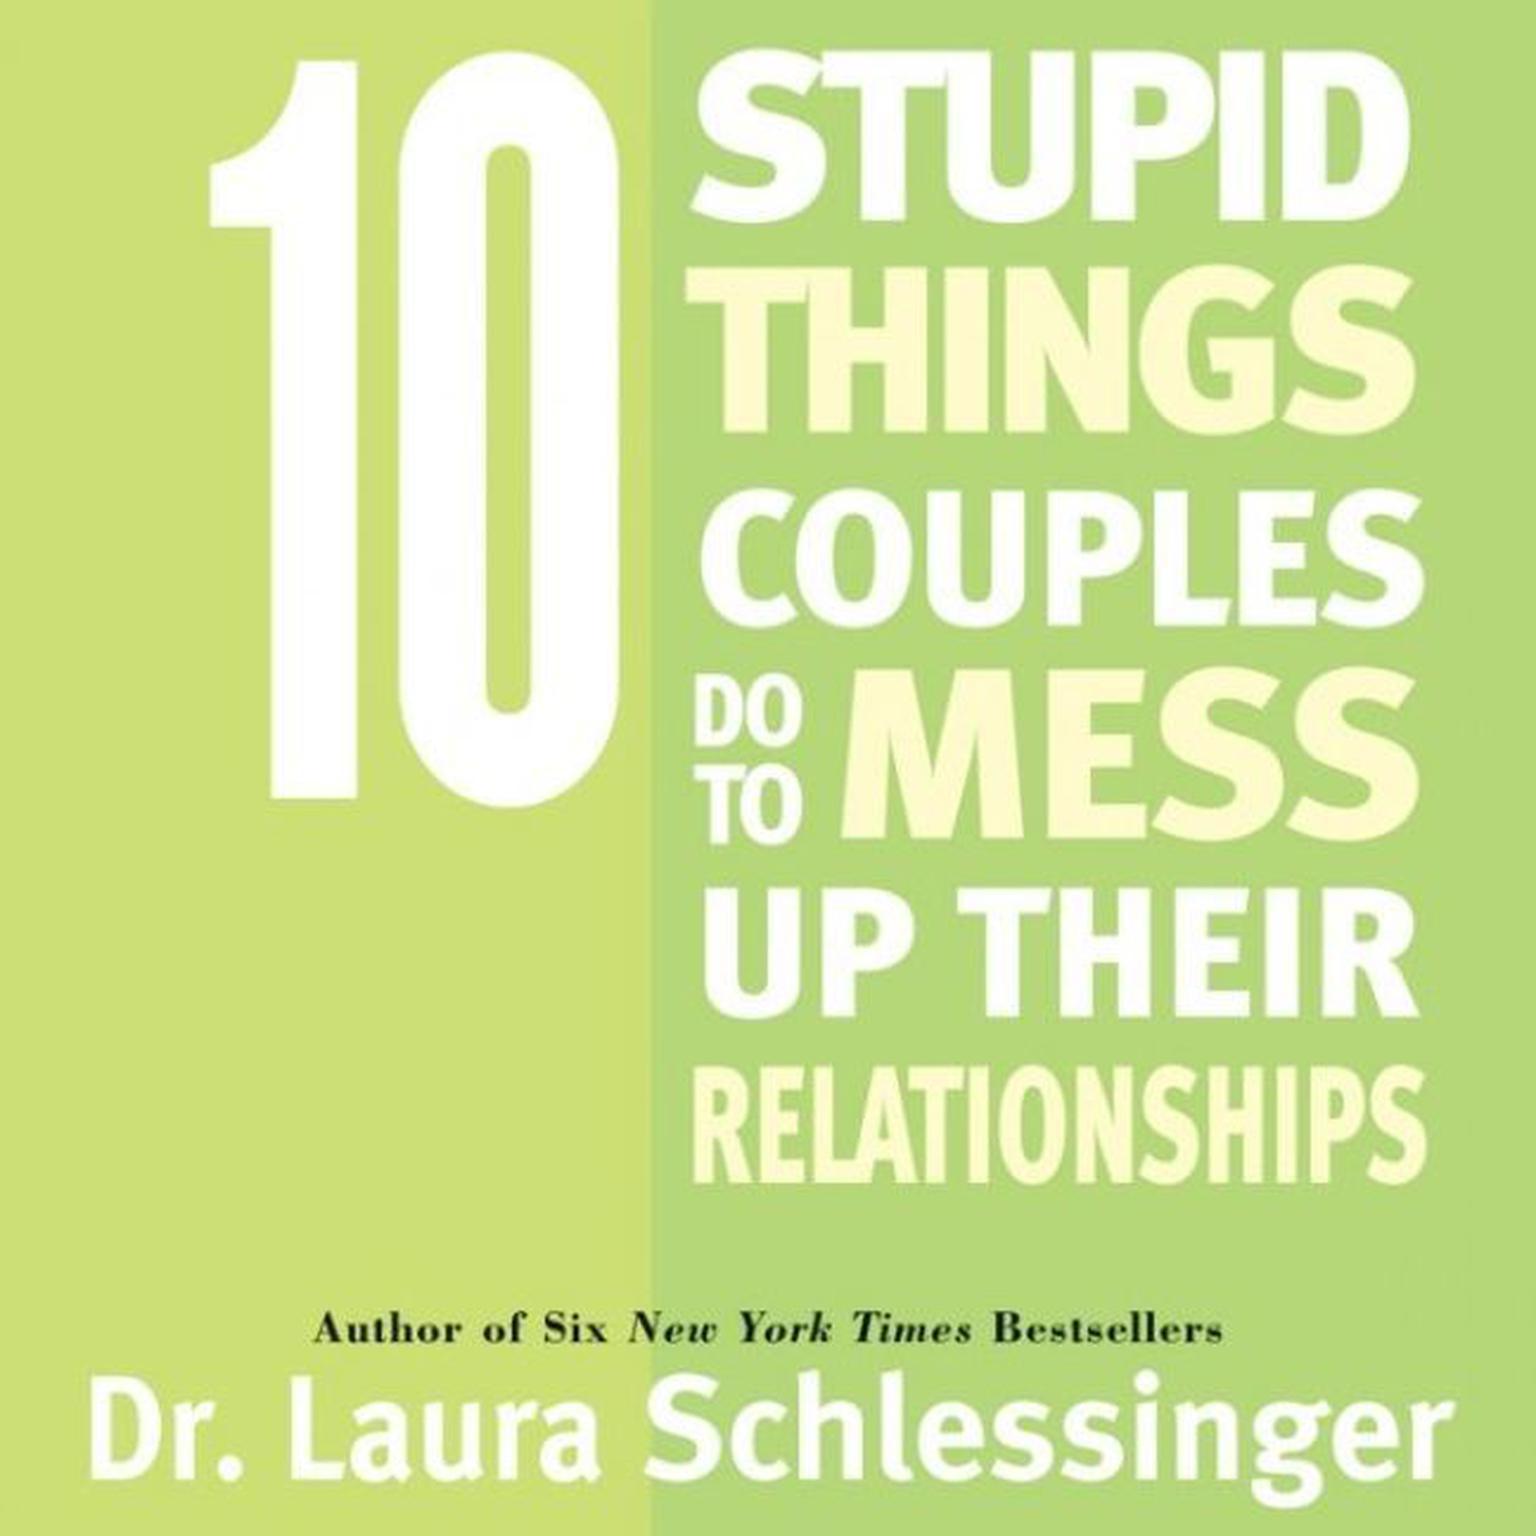 Ten Stupid Things Couples Do To Mess Up Their Relationships (Abridged) Audiobook, by Laura Schlessinger